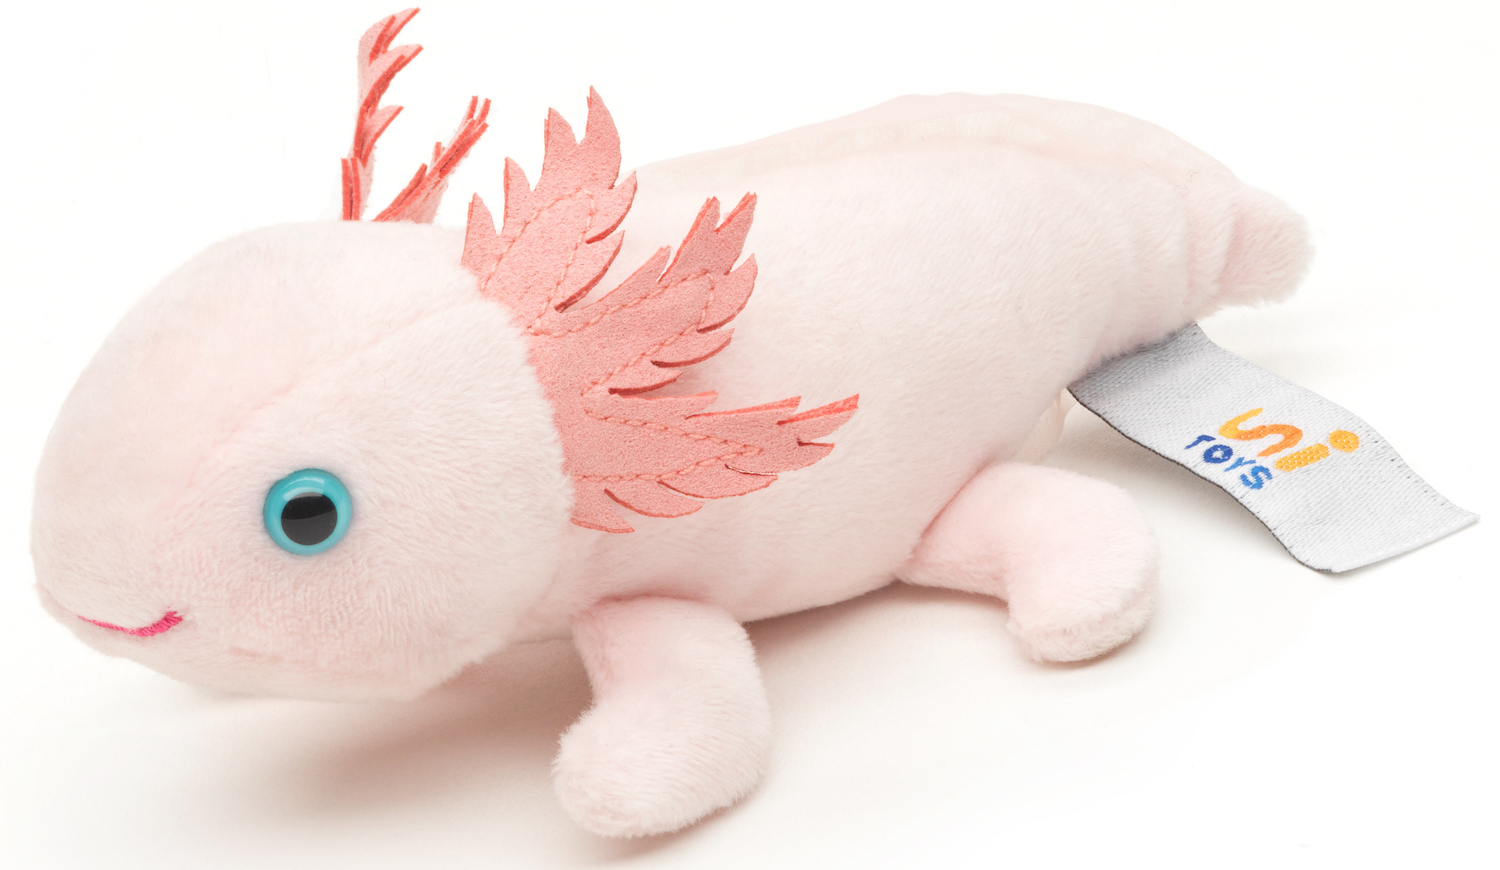 Axolotl with magnet